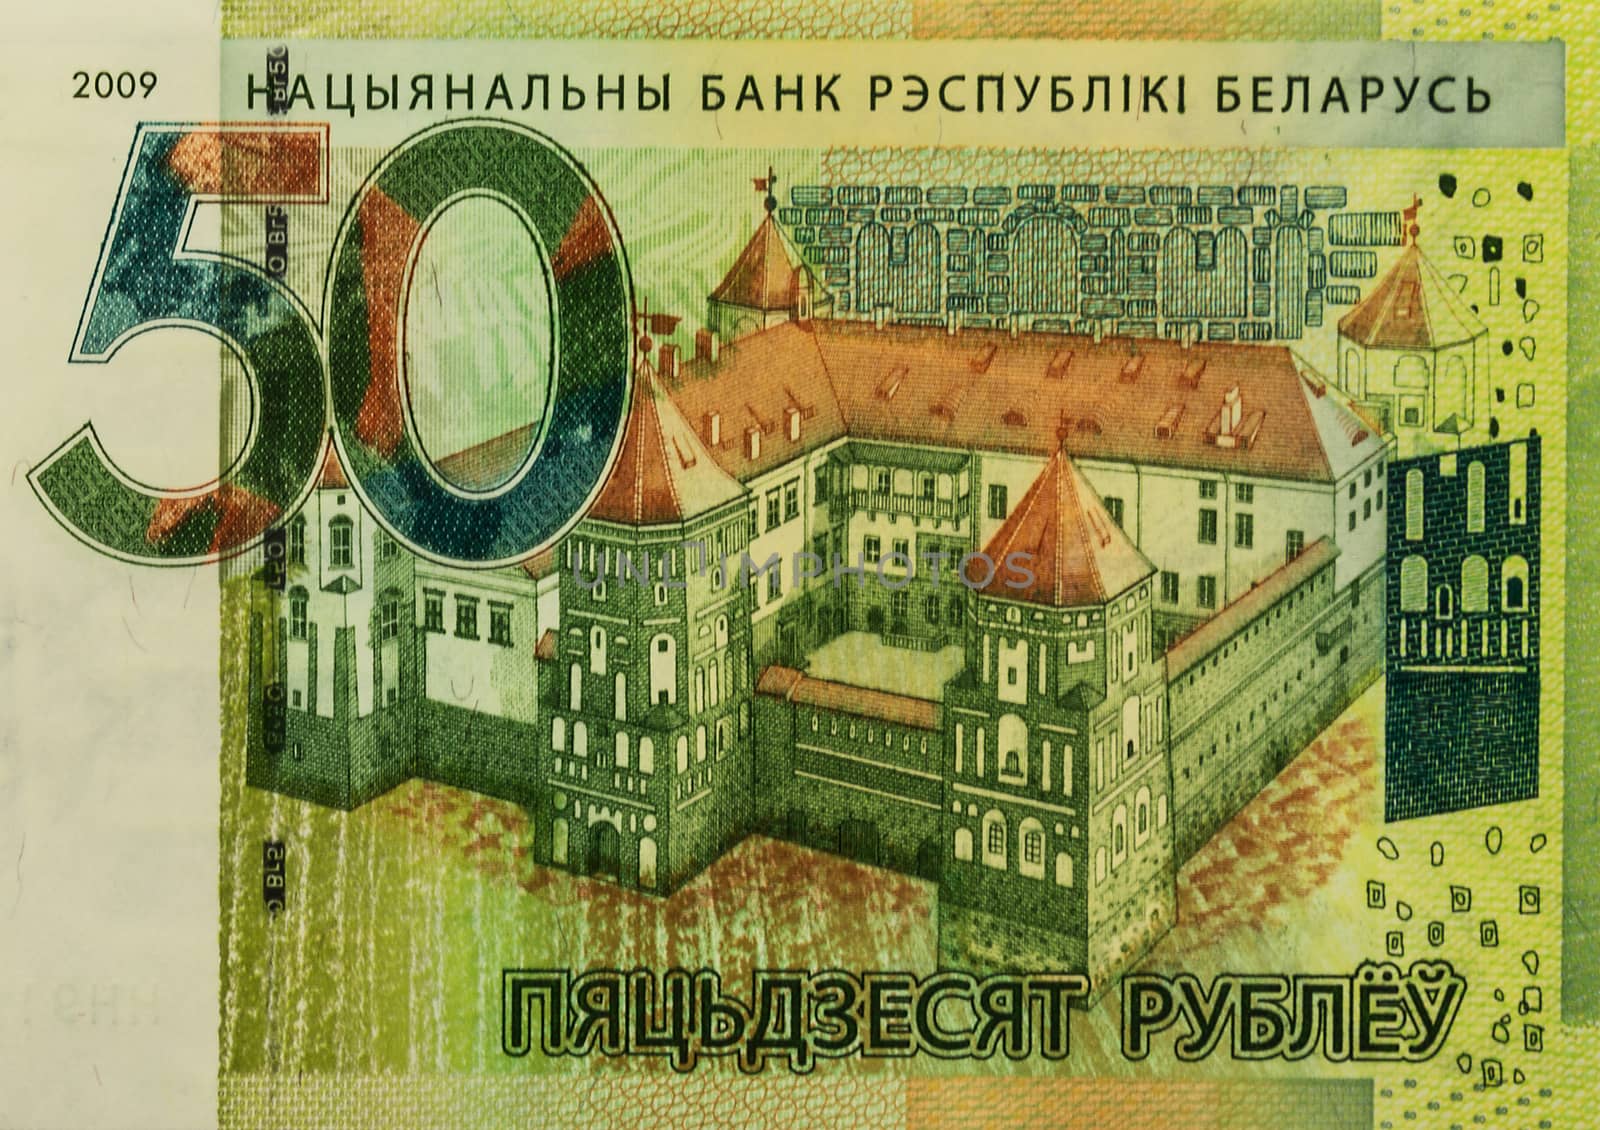 Drawing on a banknote fifty rubles by Grommik